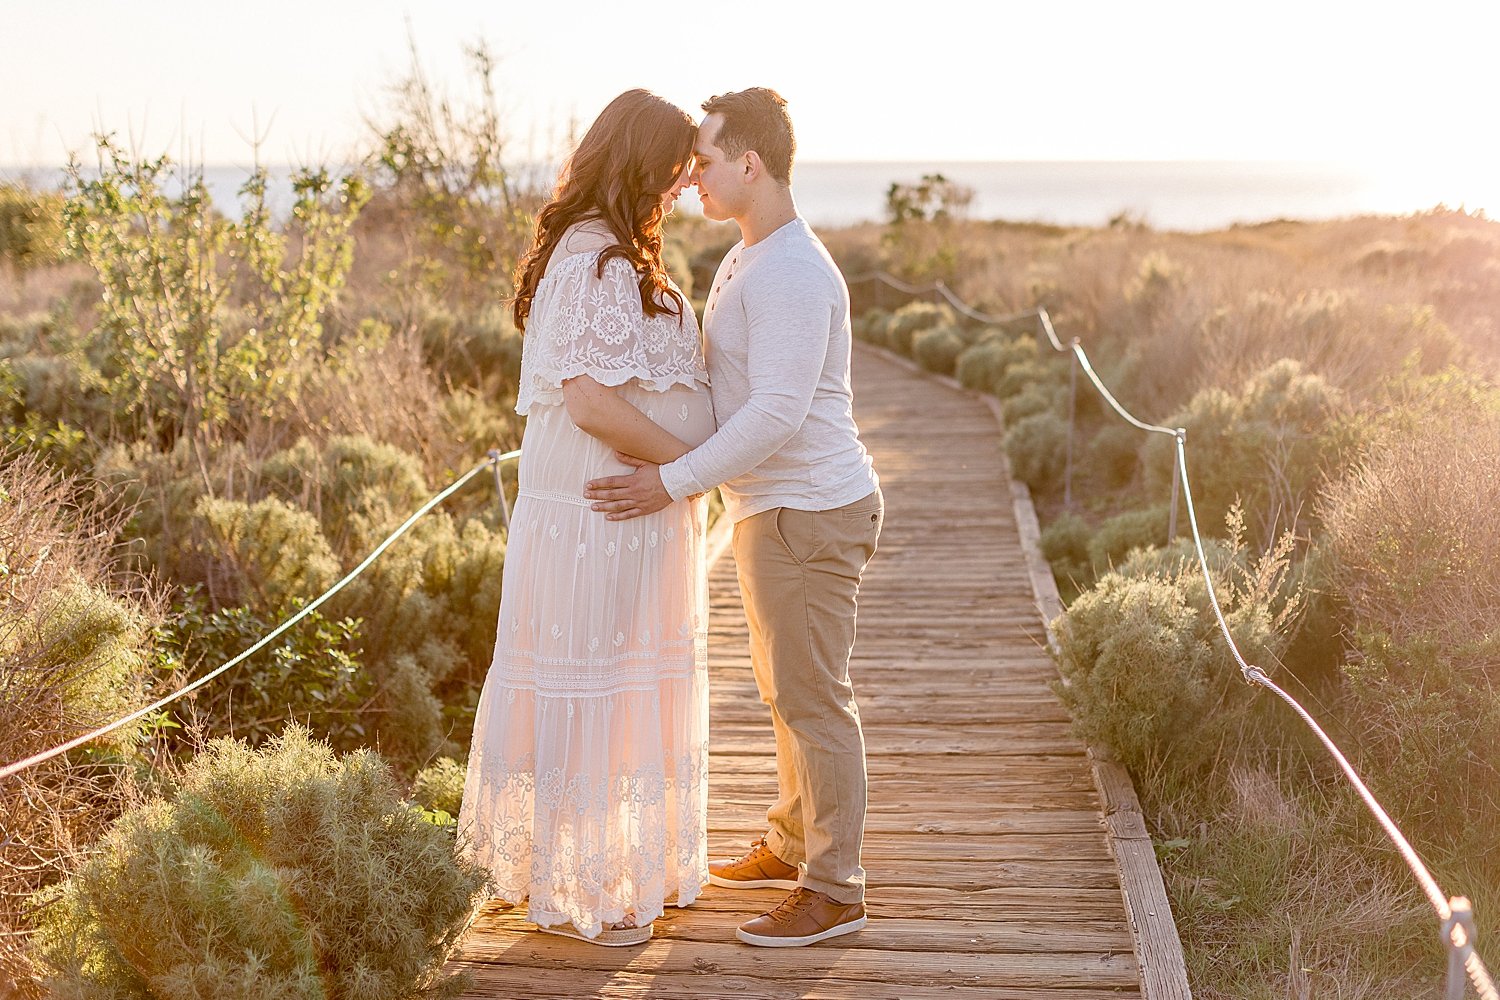 Crystal Cove beach maternity session at sunset | Ambre Williams PhotographyGolden hour at Crystal Cove beach during maternity session | Ambre Williams Photography